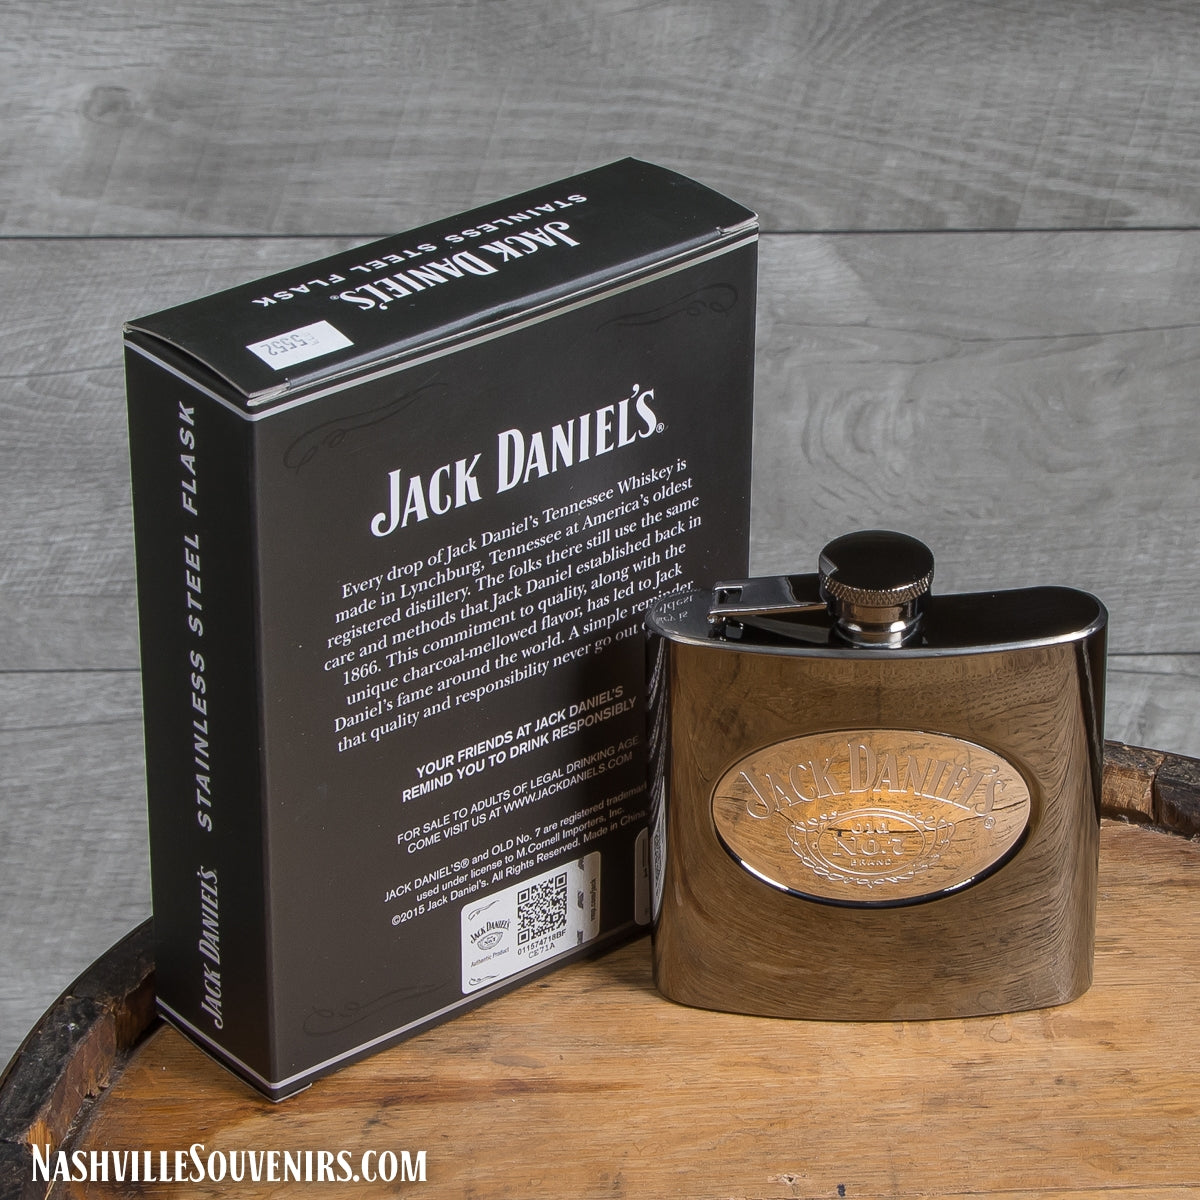 Officially licensed Jack Daniels Gun Metal Finish Flask.  FREE SHIPPING on all US orders over $75!